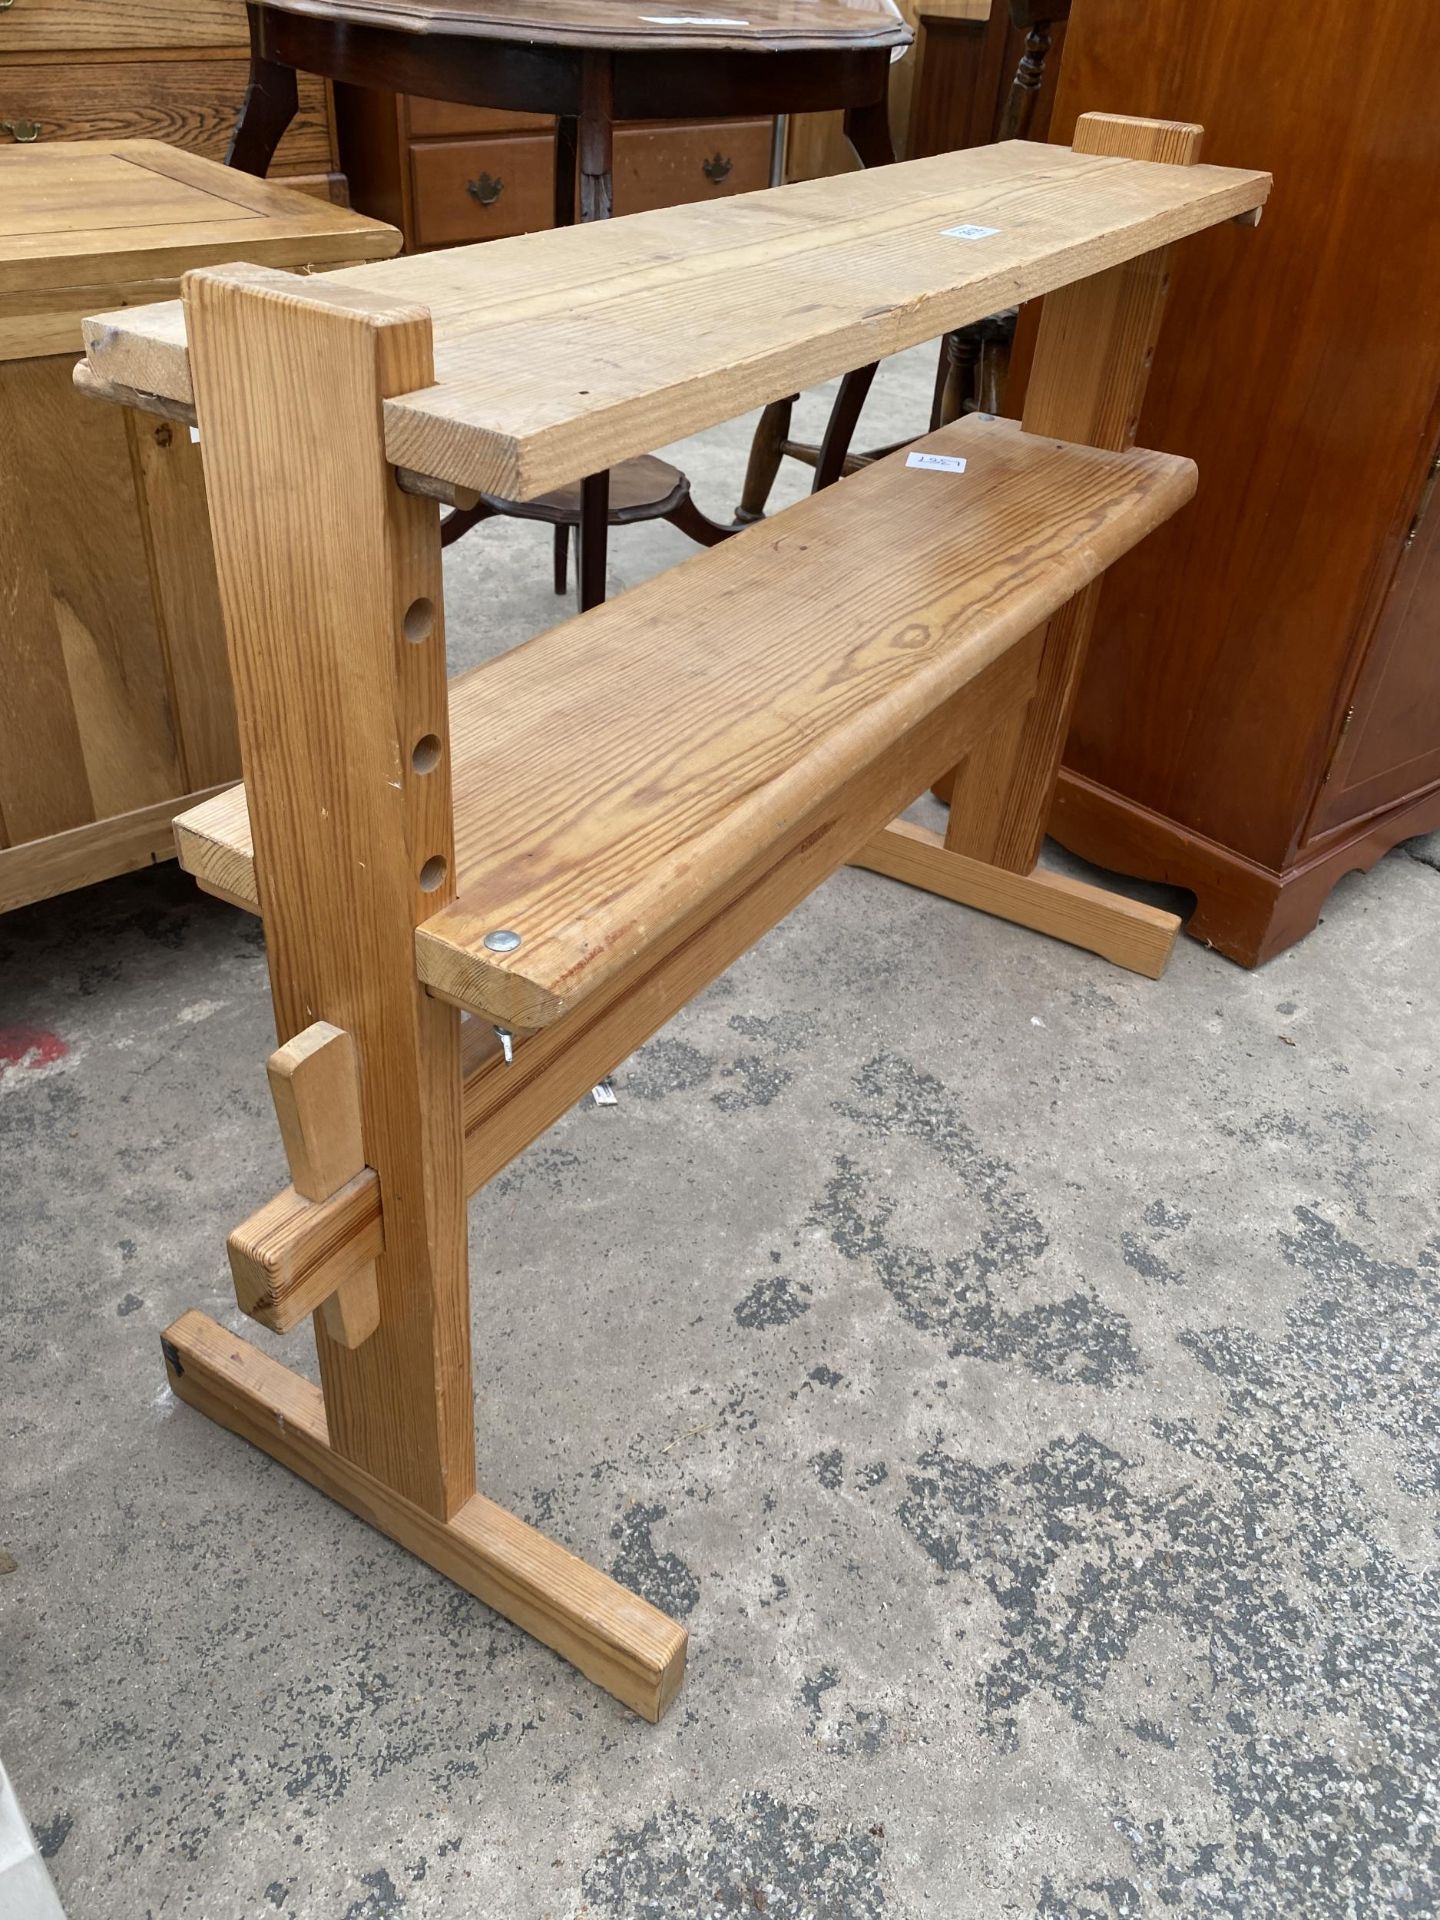 A MODERN PINE GLIMAKRA (MADE IN SWEDEN) TWO TIER STAND